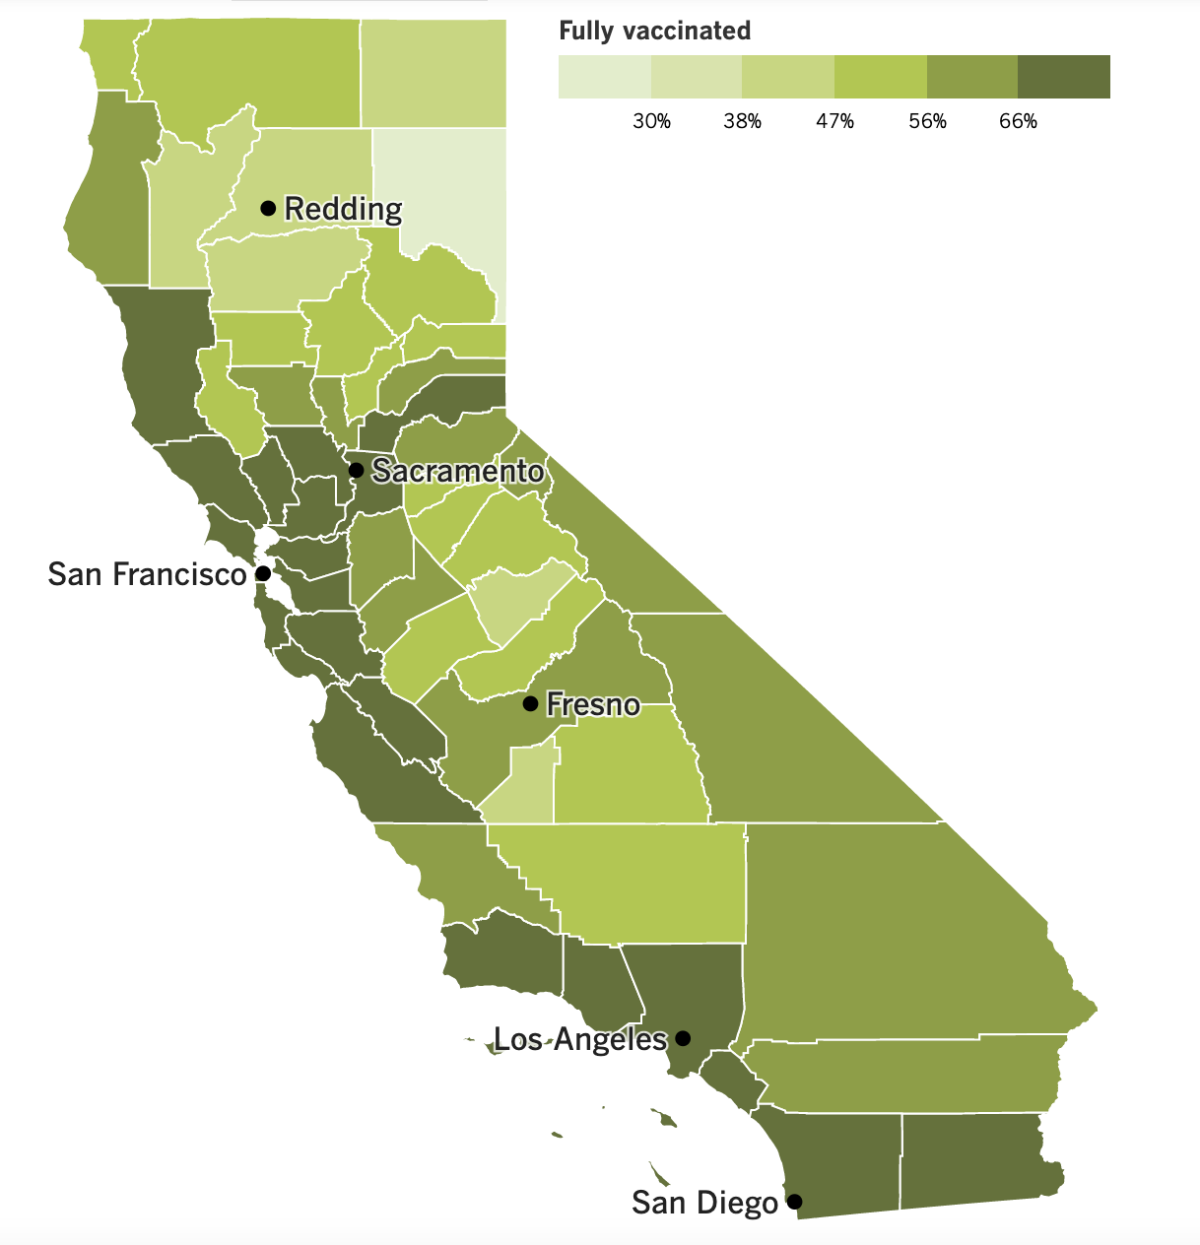 A map showing California's COVID-19 vaccination progress by county as of April 12, 2022.